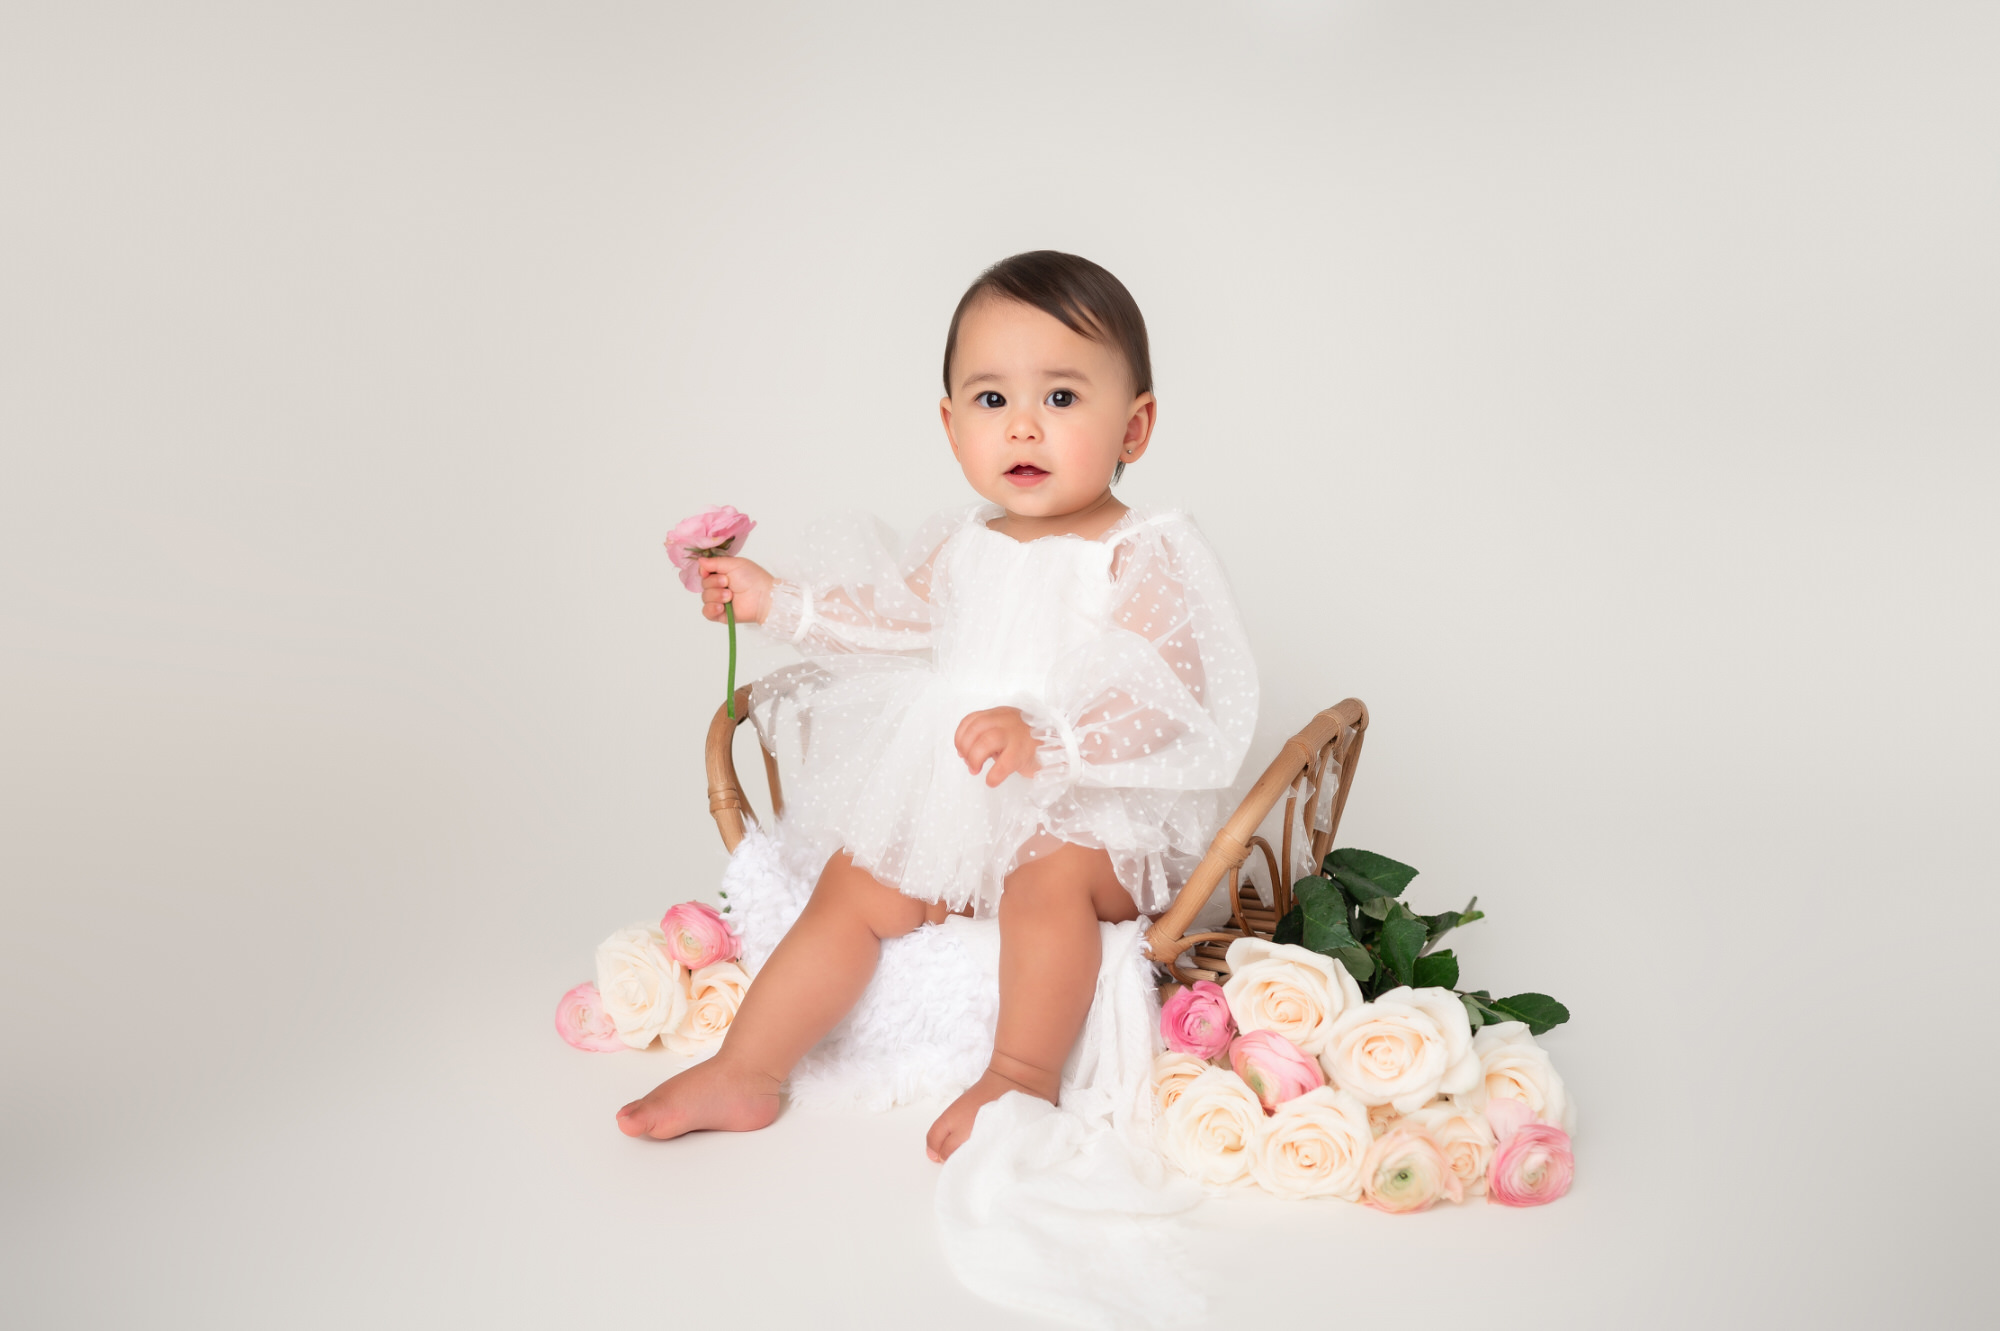 one year old in white dress studio photography surrounded by flowers • Newborn Baby Photographer in Pittsburgh